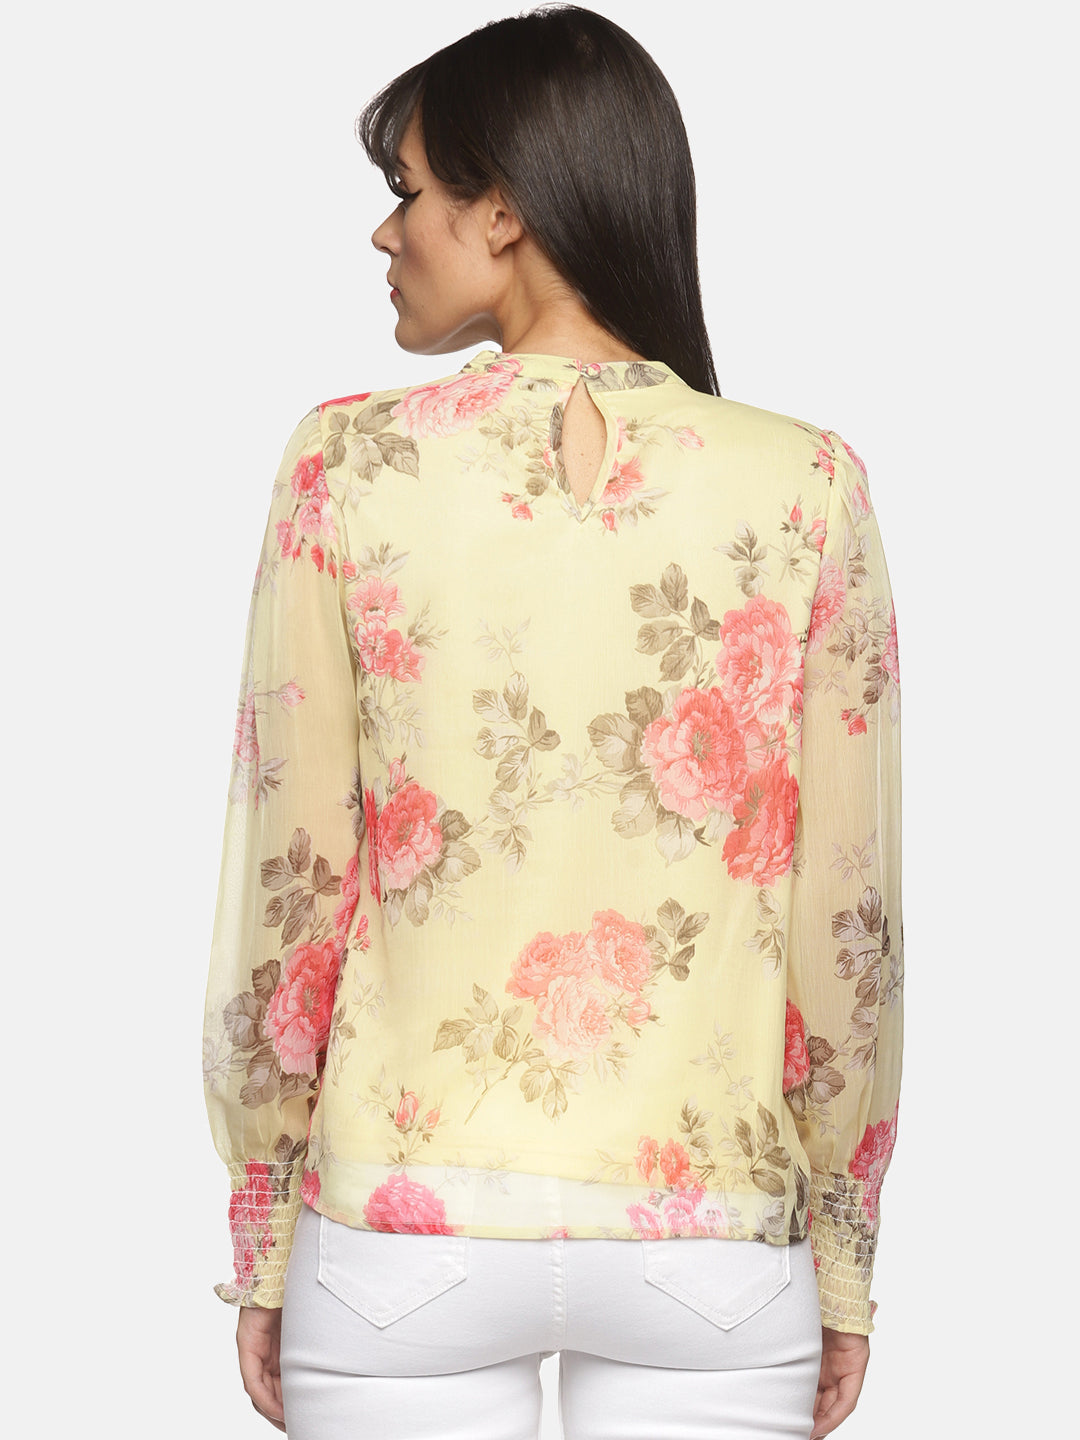 IS.U Front ruffle all over floral printed top